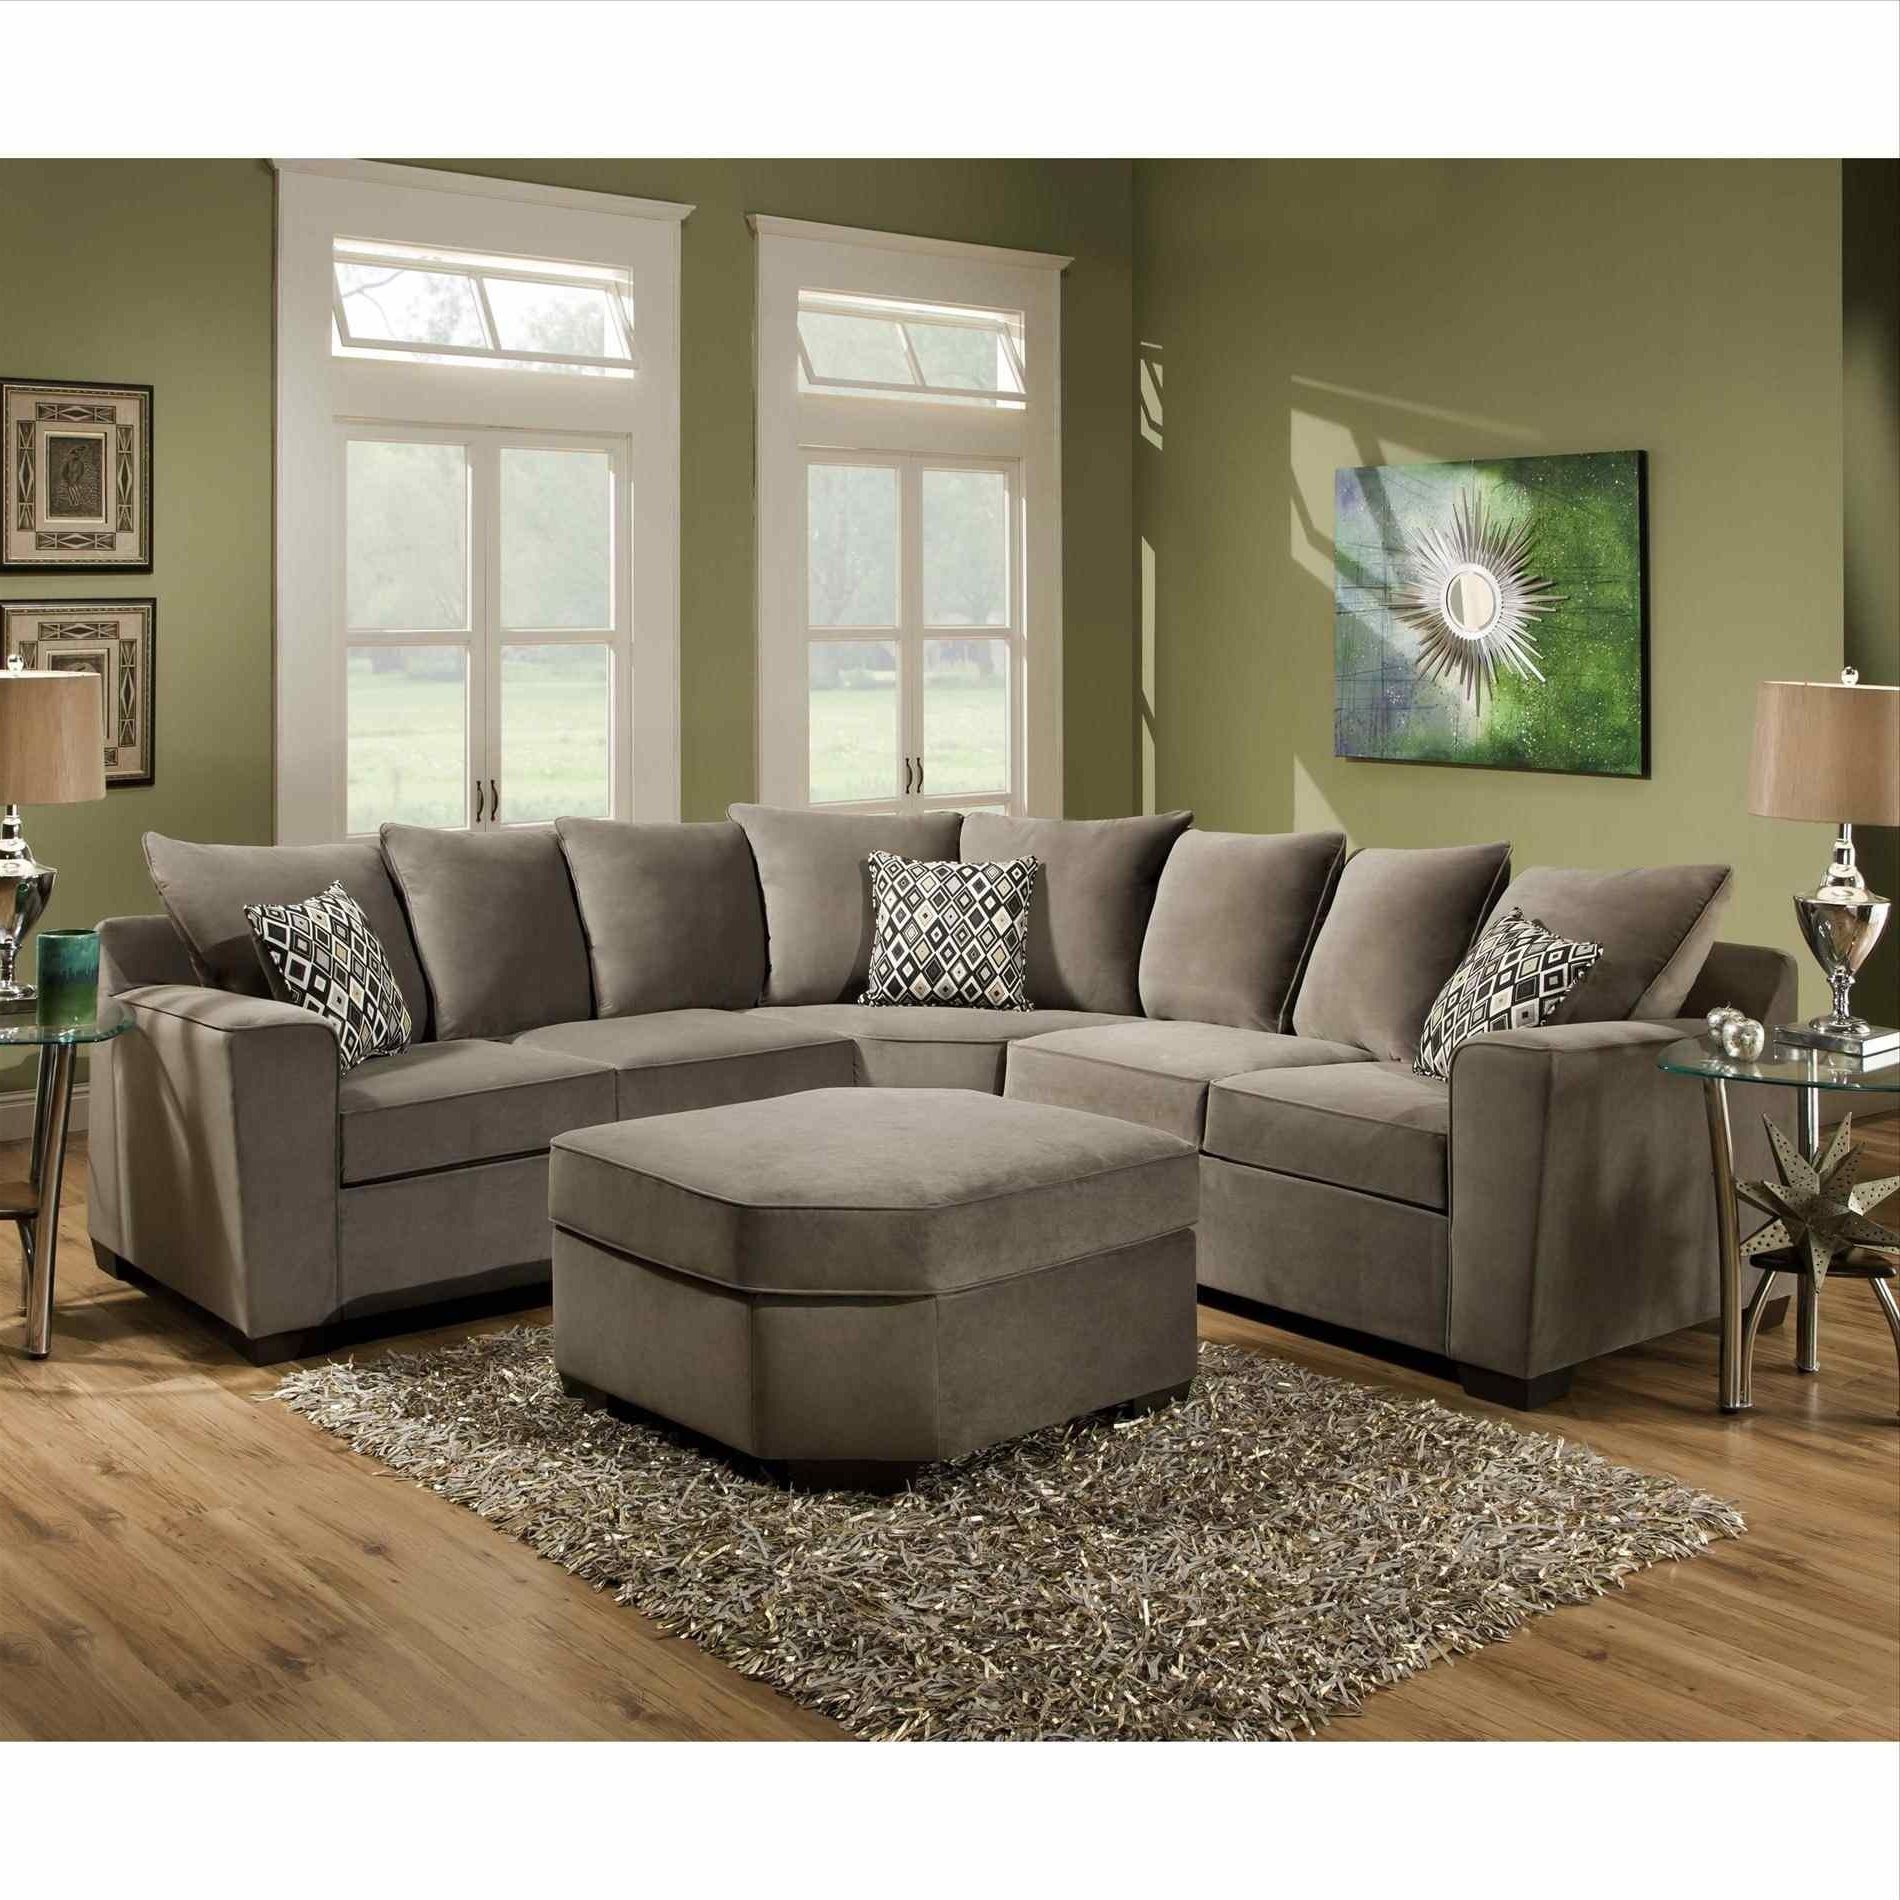 Sectional Sofas At Bad Boy With Newest Couch Furniture Bad Boy Sectional Es Wrap Around Couch Furniture 